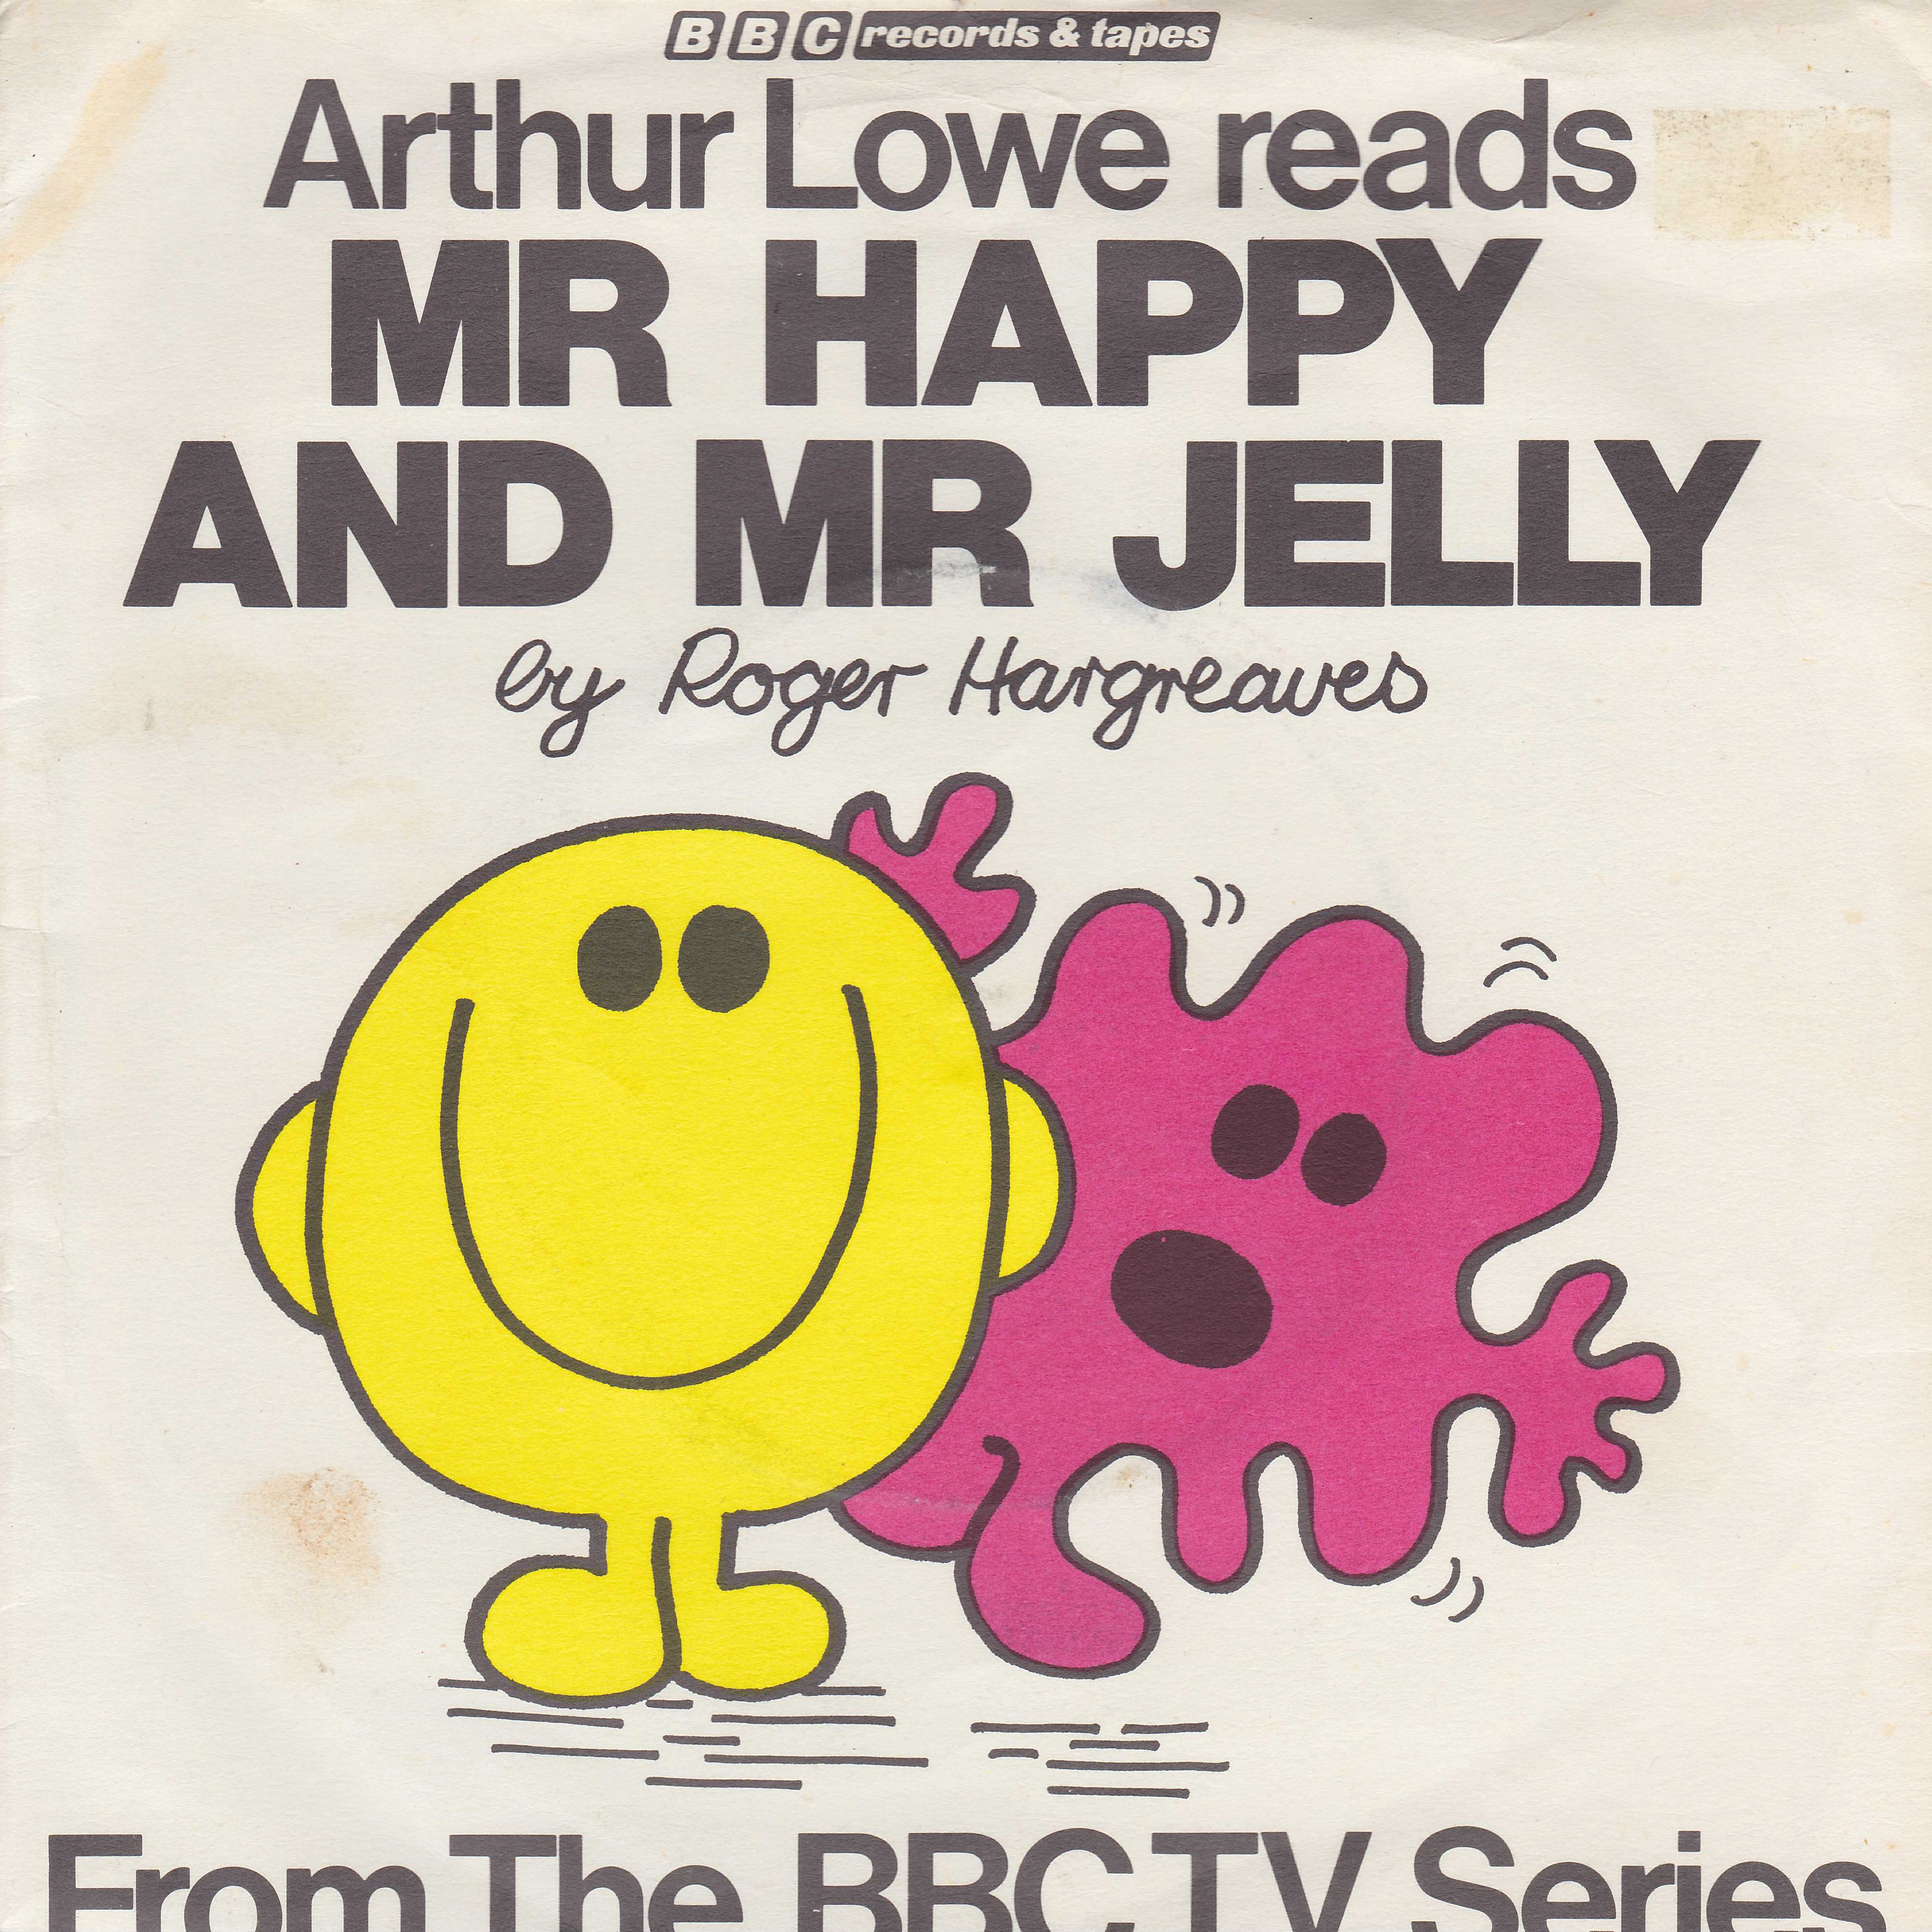 Picture of RESL 40 Mr Men - Mr Happy by artist Roger Hargreaves from the BBC singles - Records and Tapes library